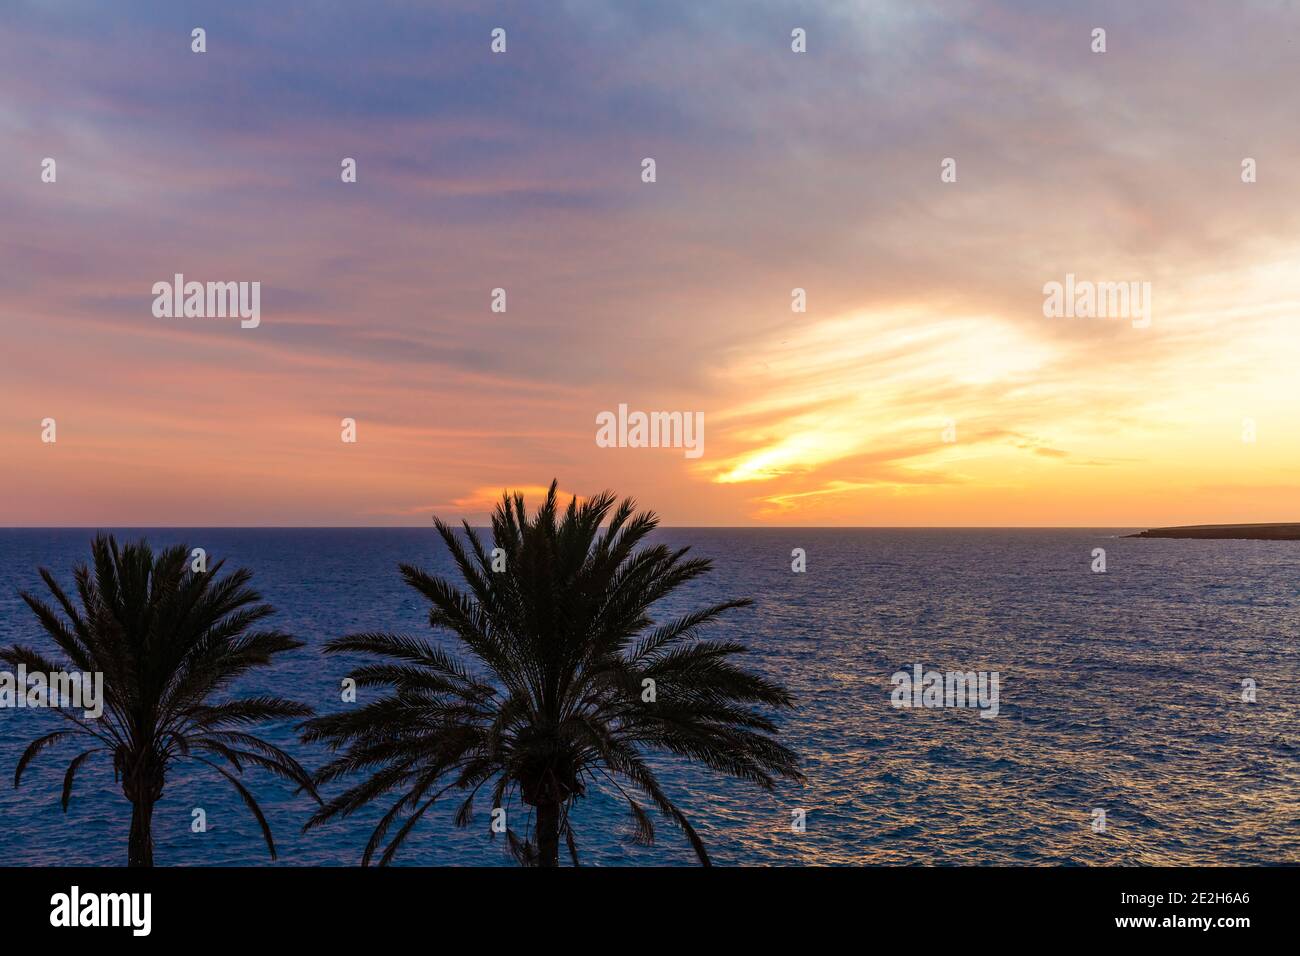 Palm tree silhouette during sunset in canary islands Stock Photo